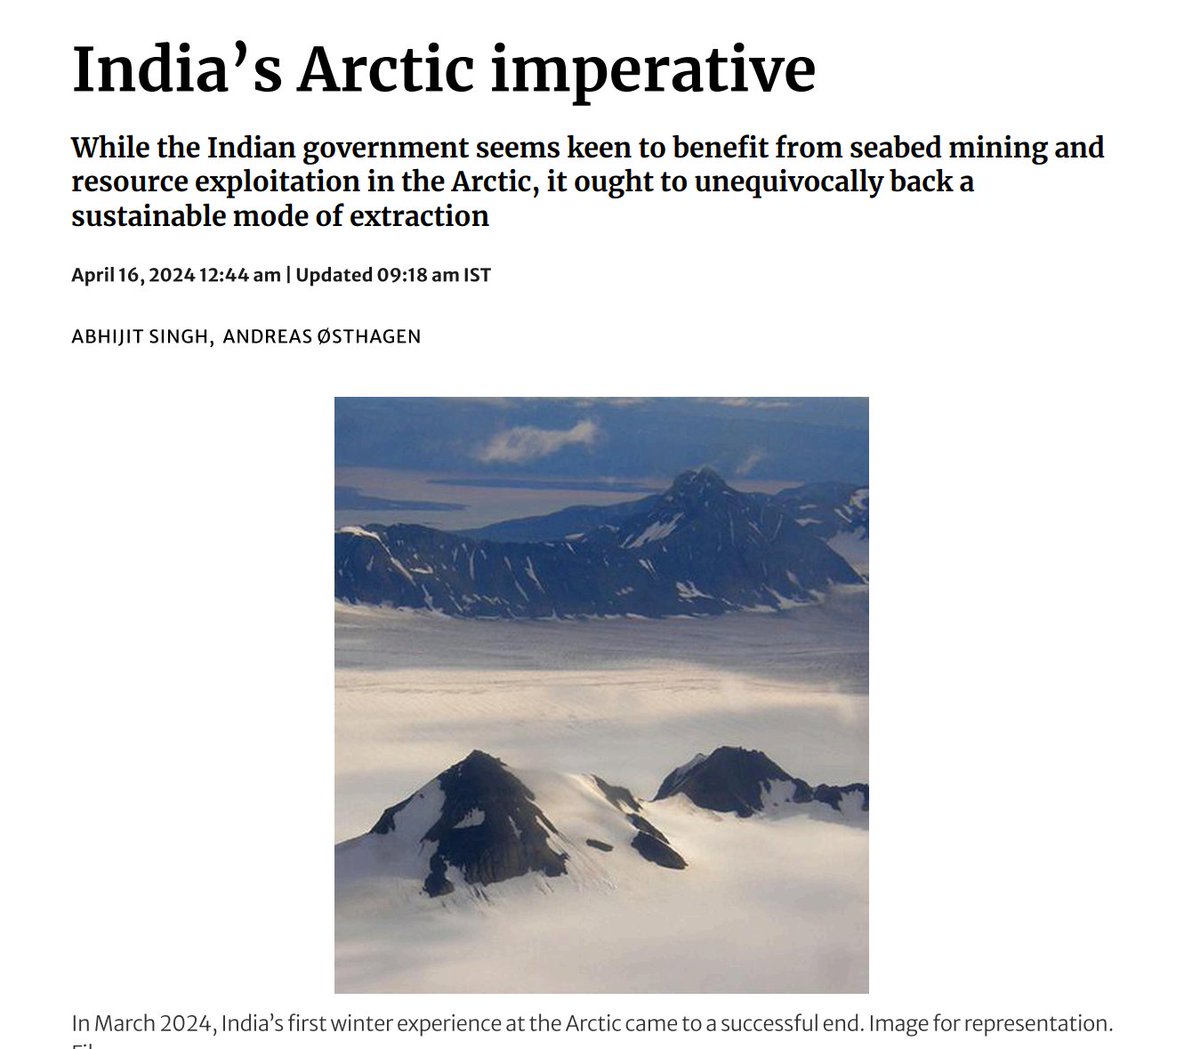 India’s Arctic imperative: 🇮🇳❄️While Indian government seems interested in seabed mining and resource exploitation in the Arctic, it ought to back a sustainable mode of extraction, write FNI's @AndreasOsthagen & @abhijit227 at the @orfonline in @the_hindu. thehindu.com/opinion/op-ed/…